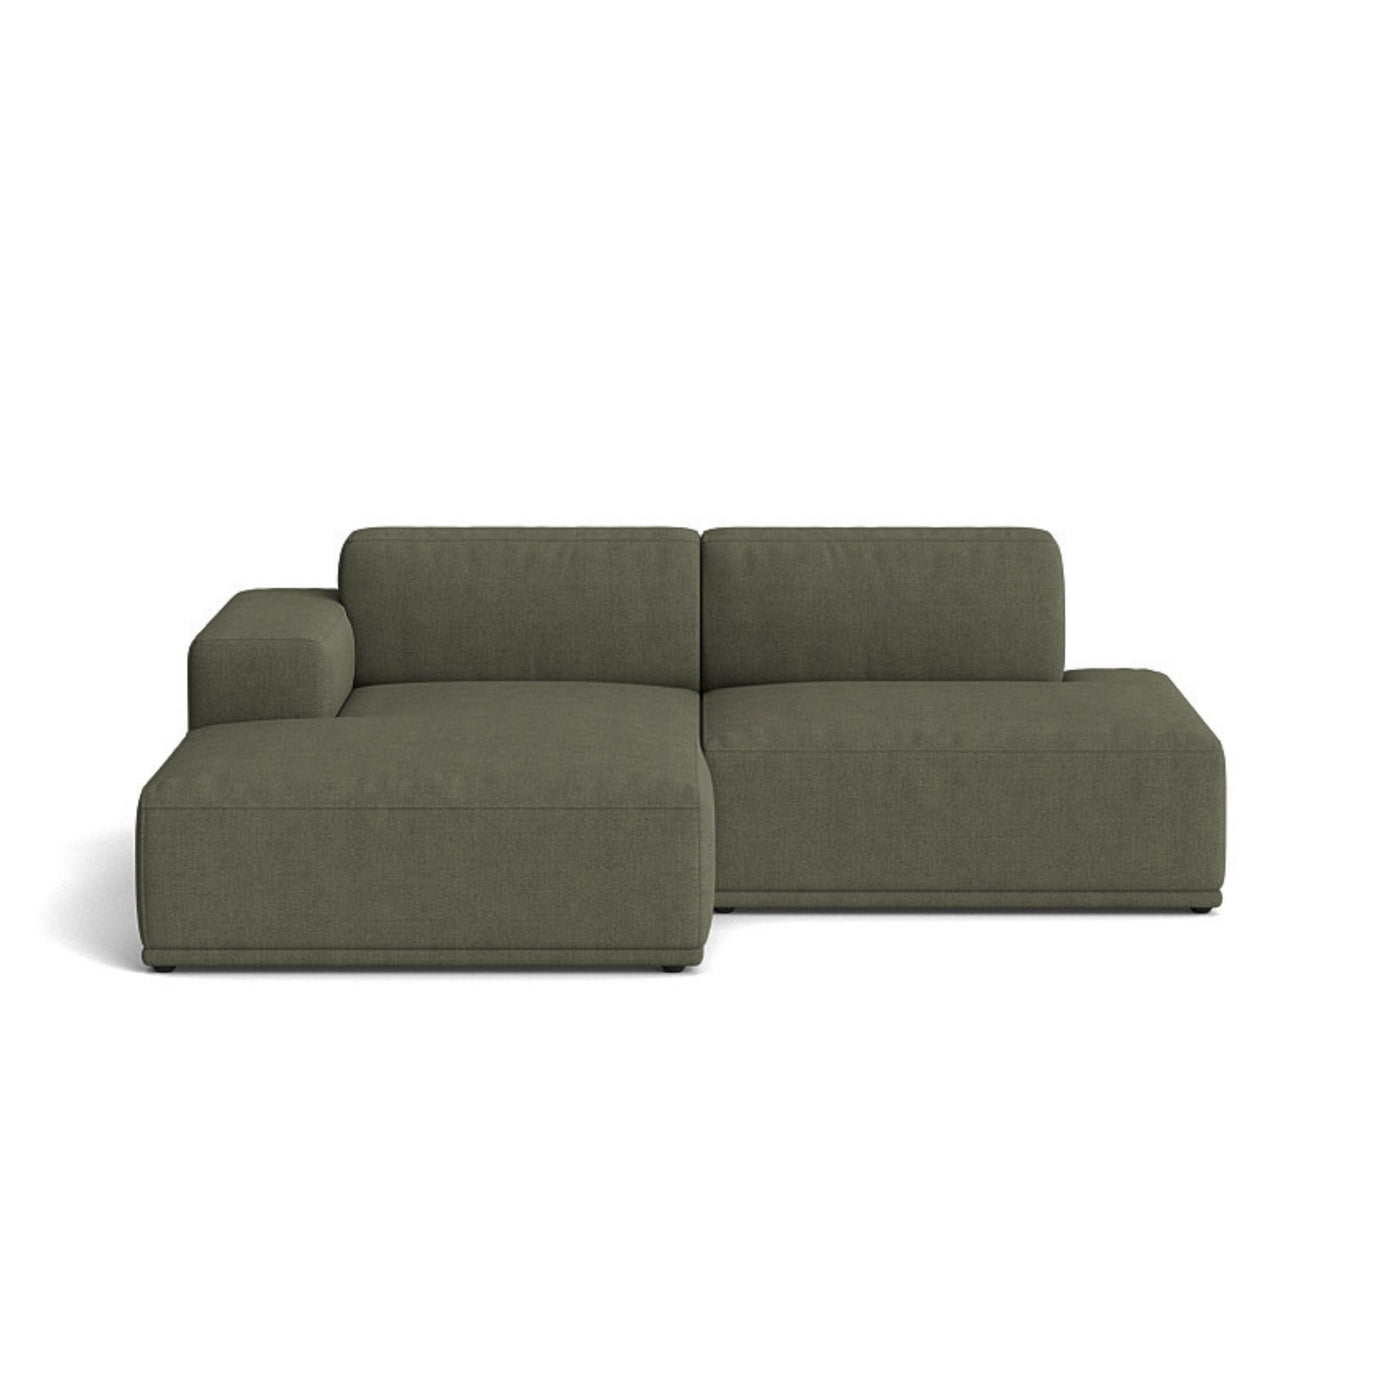 Muuto Connect Soft Modular 2 Seater Sofa, configuration 3. made-to-order from someday designs. #colour_fiord-961